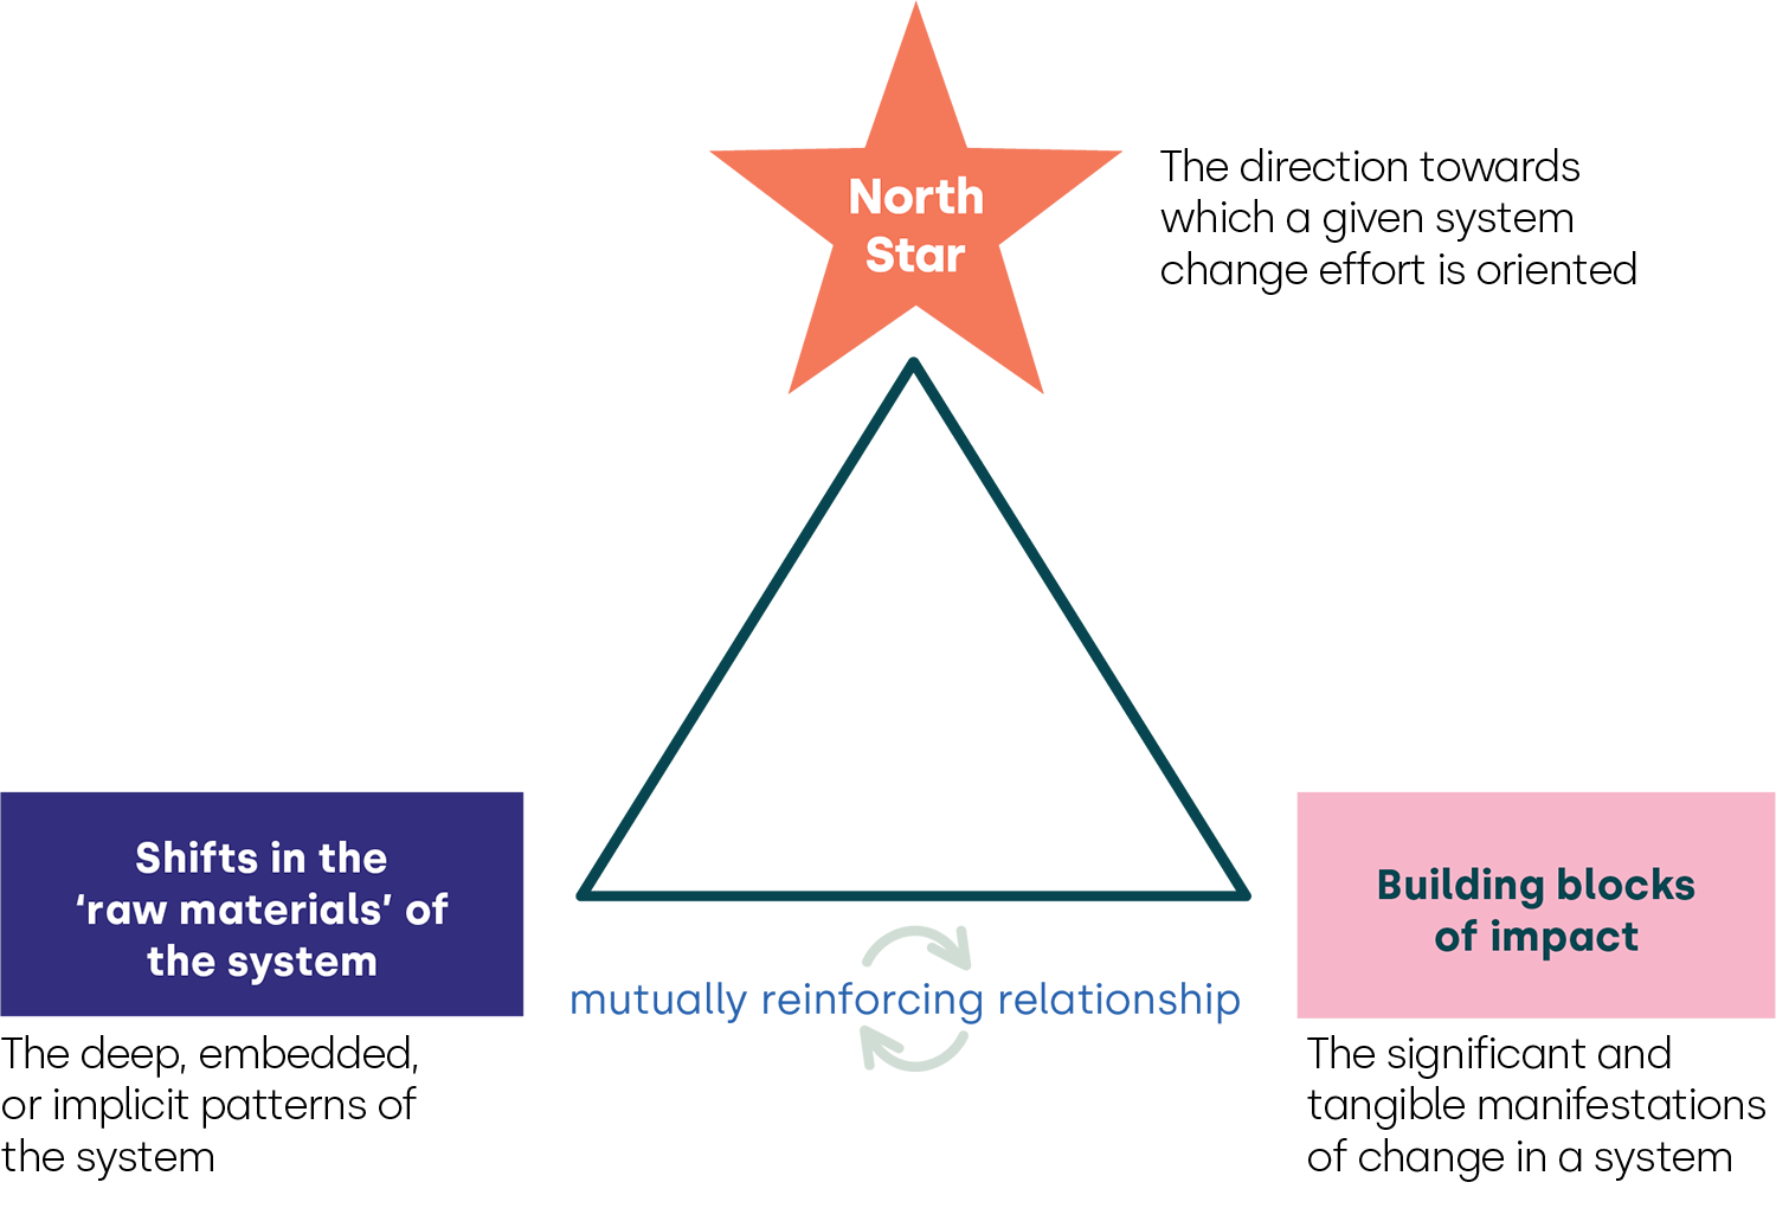 A triangle. At the top, an orange star with the words North Star inside it. To the bottom left corner of the triangle, a blue box with the words 'Shifts in the raw materials of the system'. To the bottom right, a pink box with the words 'Building blocks of impact' inside. The words 'mutually reinforcing relationship', with arrows, link the bottom right and bottom left blocks